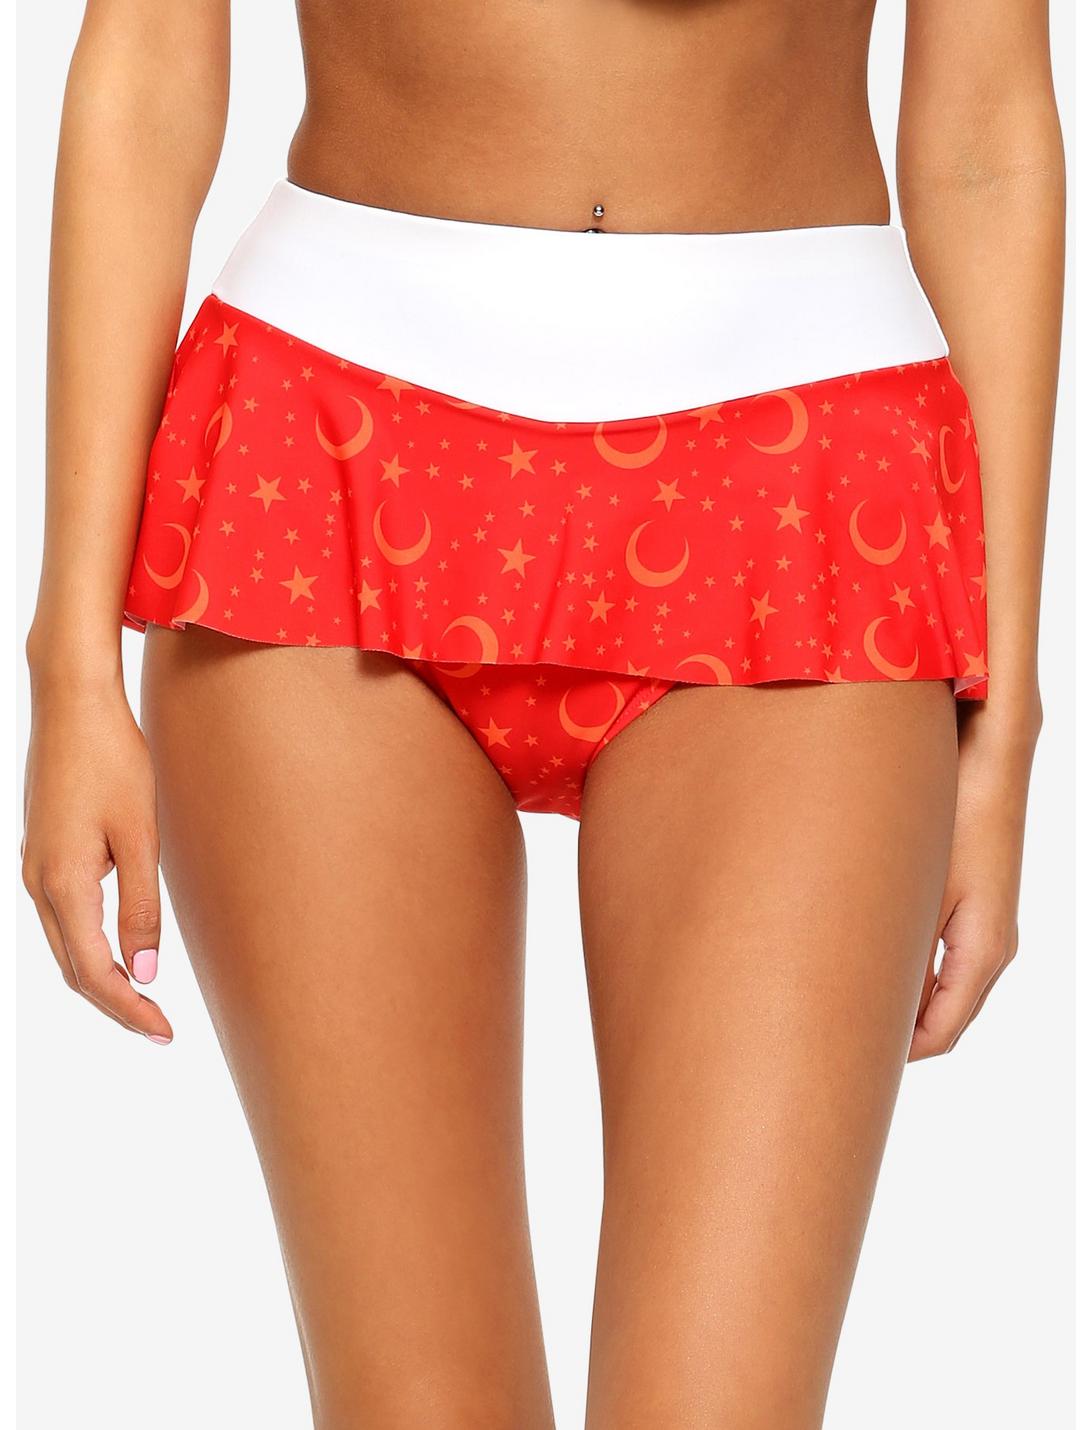 Sailor Moon Sailor Mars Cosplay Skirted Swim Bottoms, WHITE  RED, hi-res